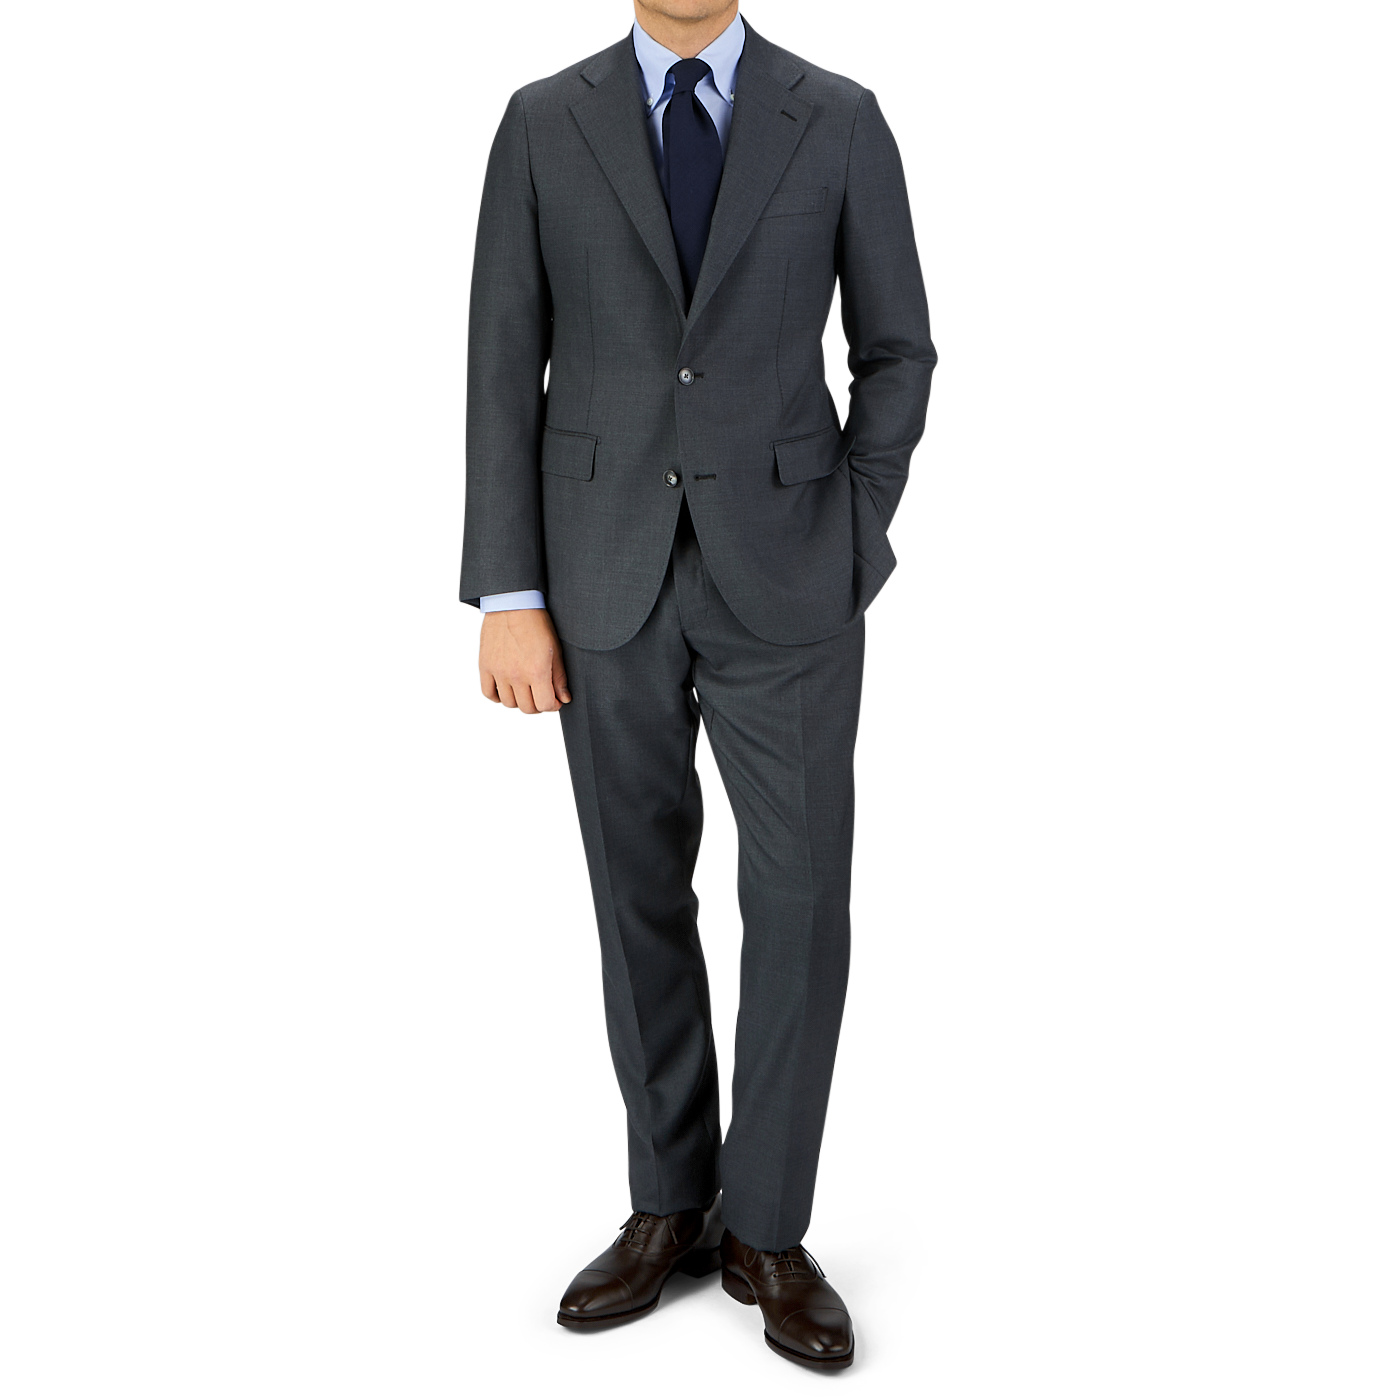 Man in a Grey Super 100's Wool Suit Jacket blazer with a blue tie standing against a gray background. (Baltzar Sartorial)